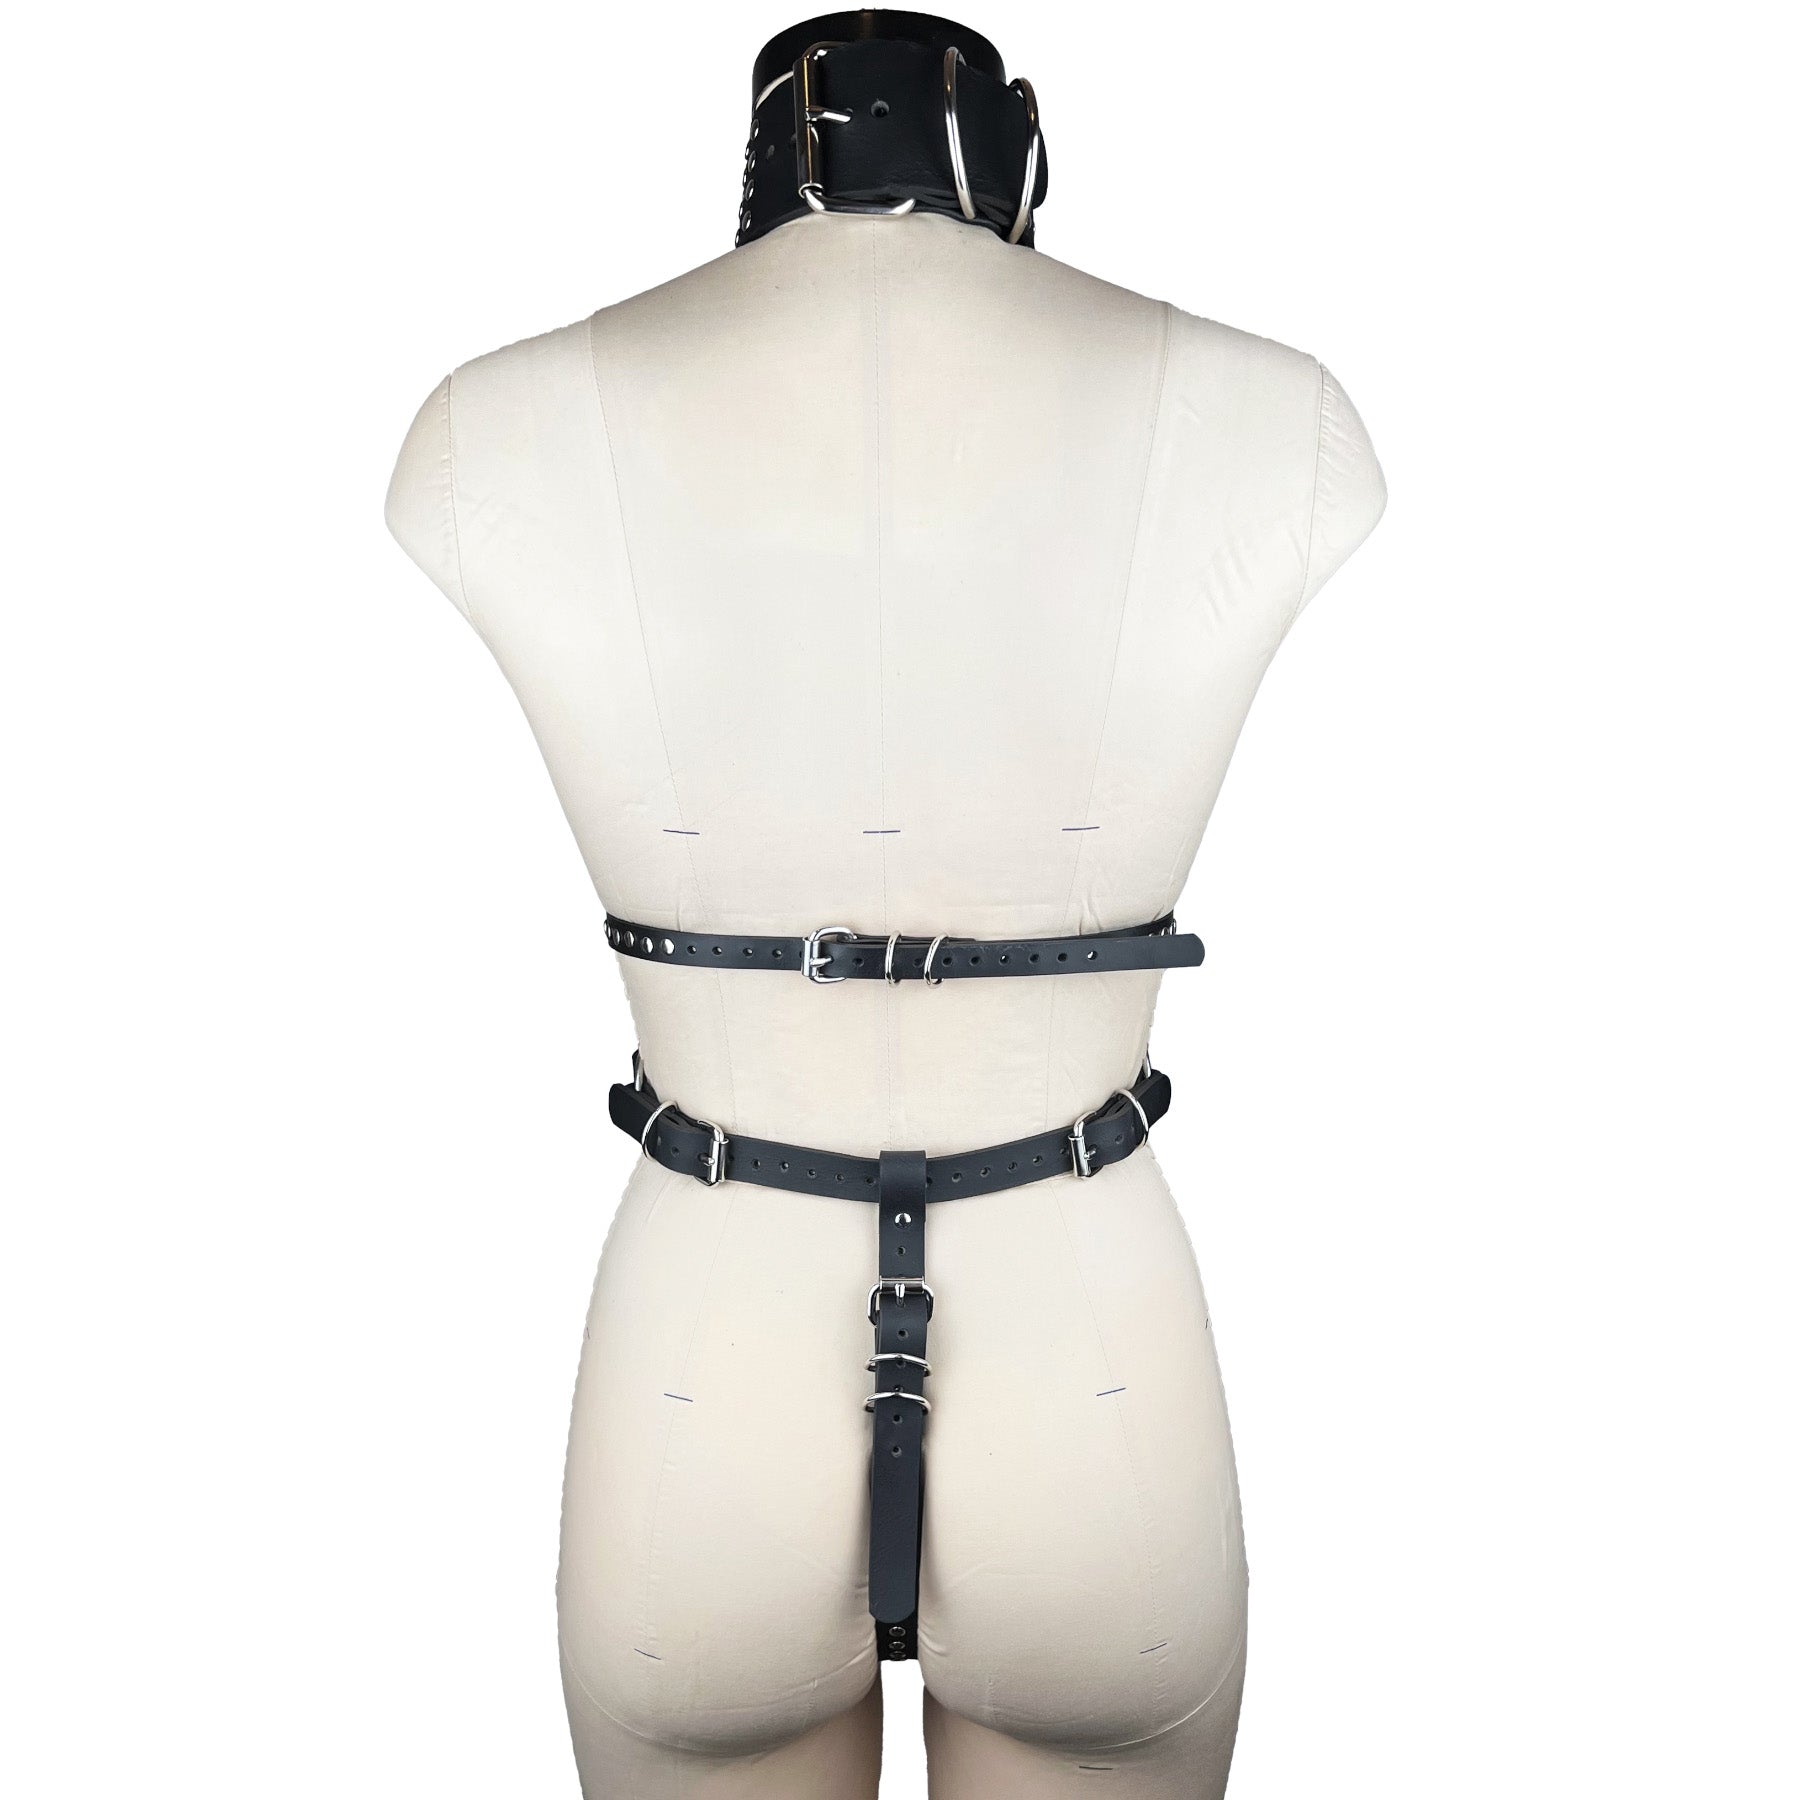 luxury Italian leather and silver studs fashion and fetish body harness, bespoke, made-to-order in nyc, back view